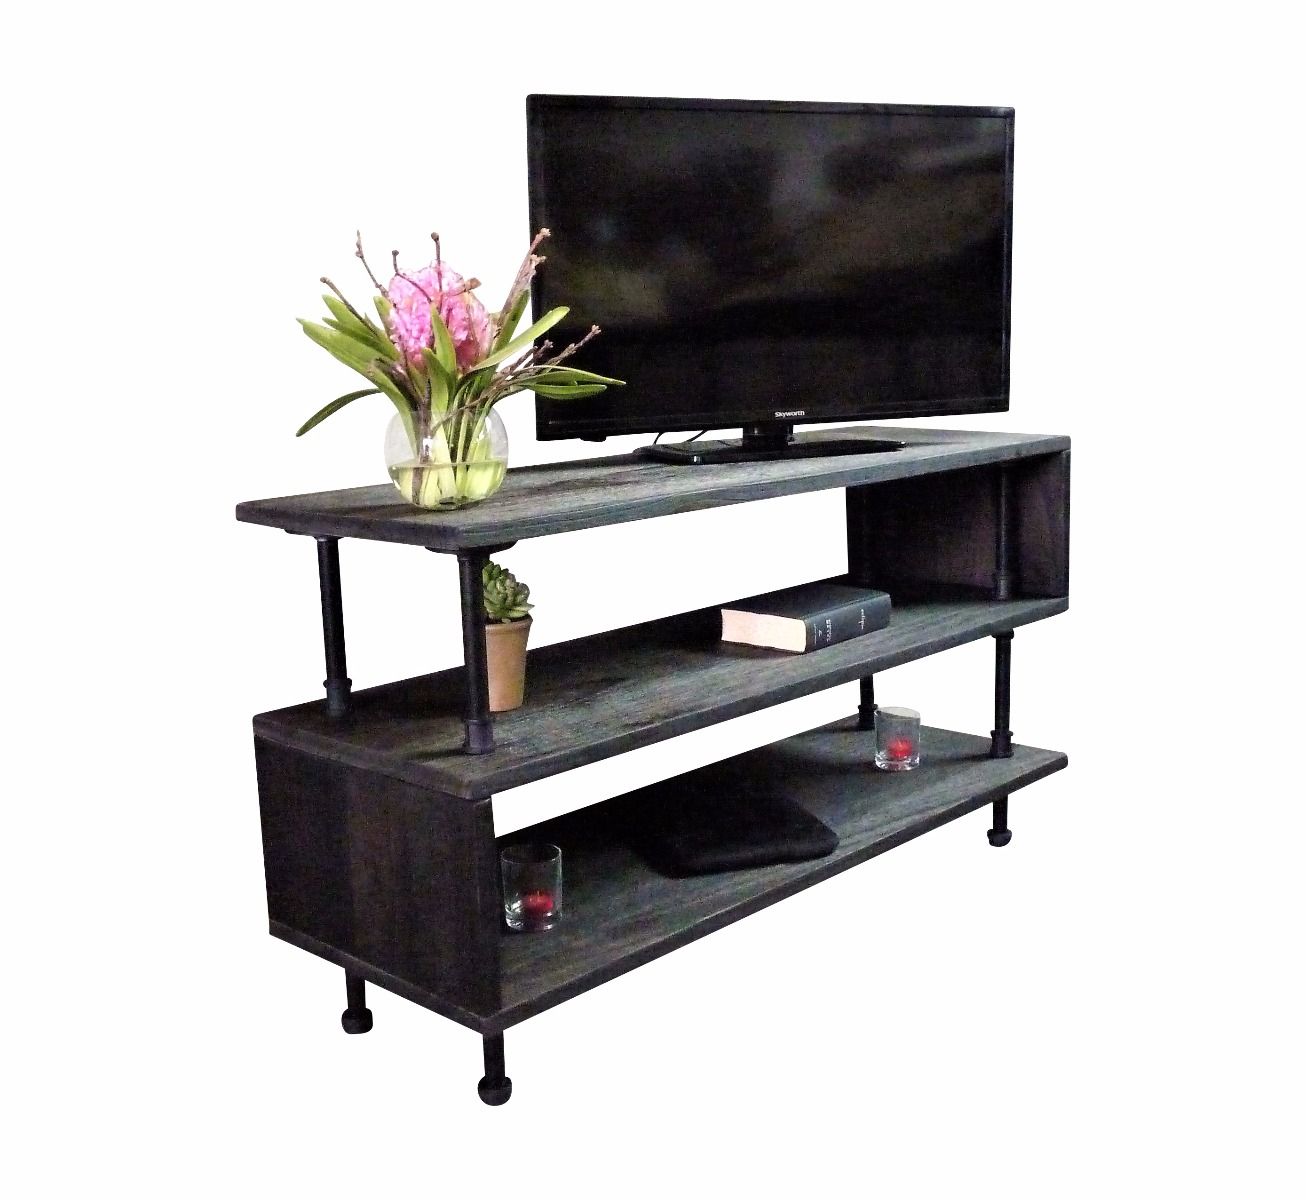 Tucson Modern Industrial Tv Stand Regarding Industrial Tv Stands (View 14 of 15)